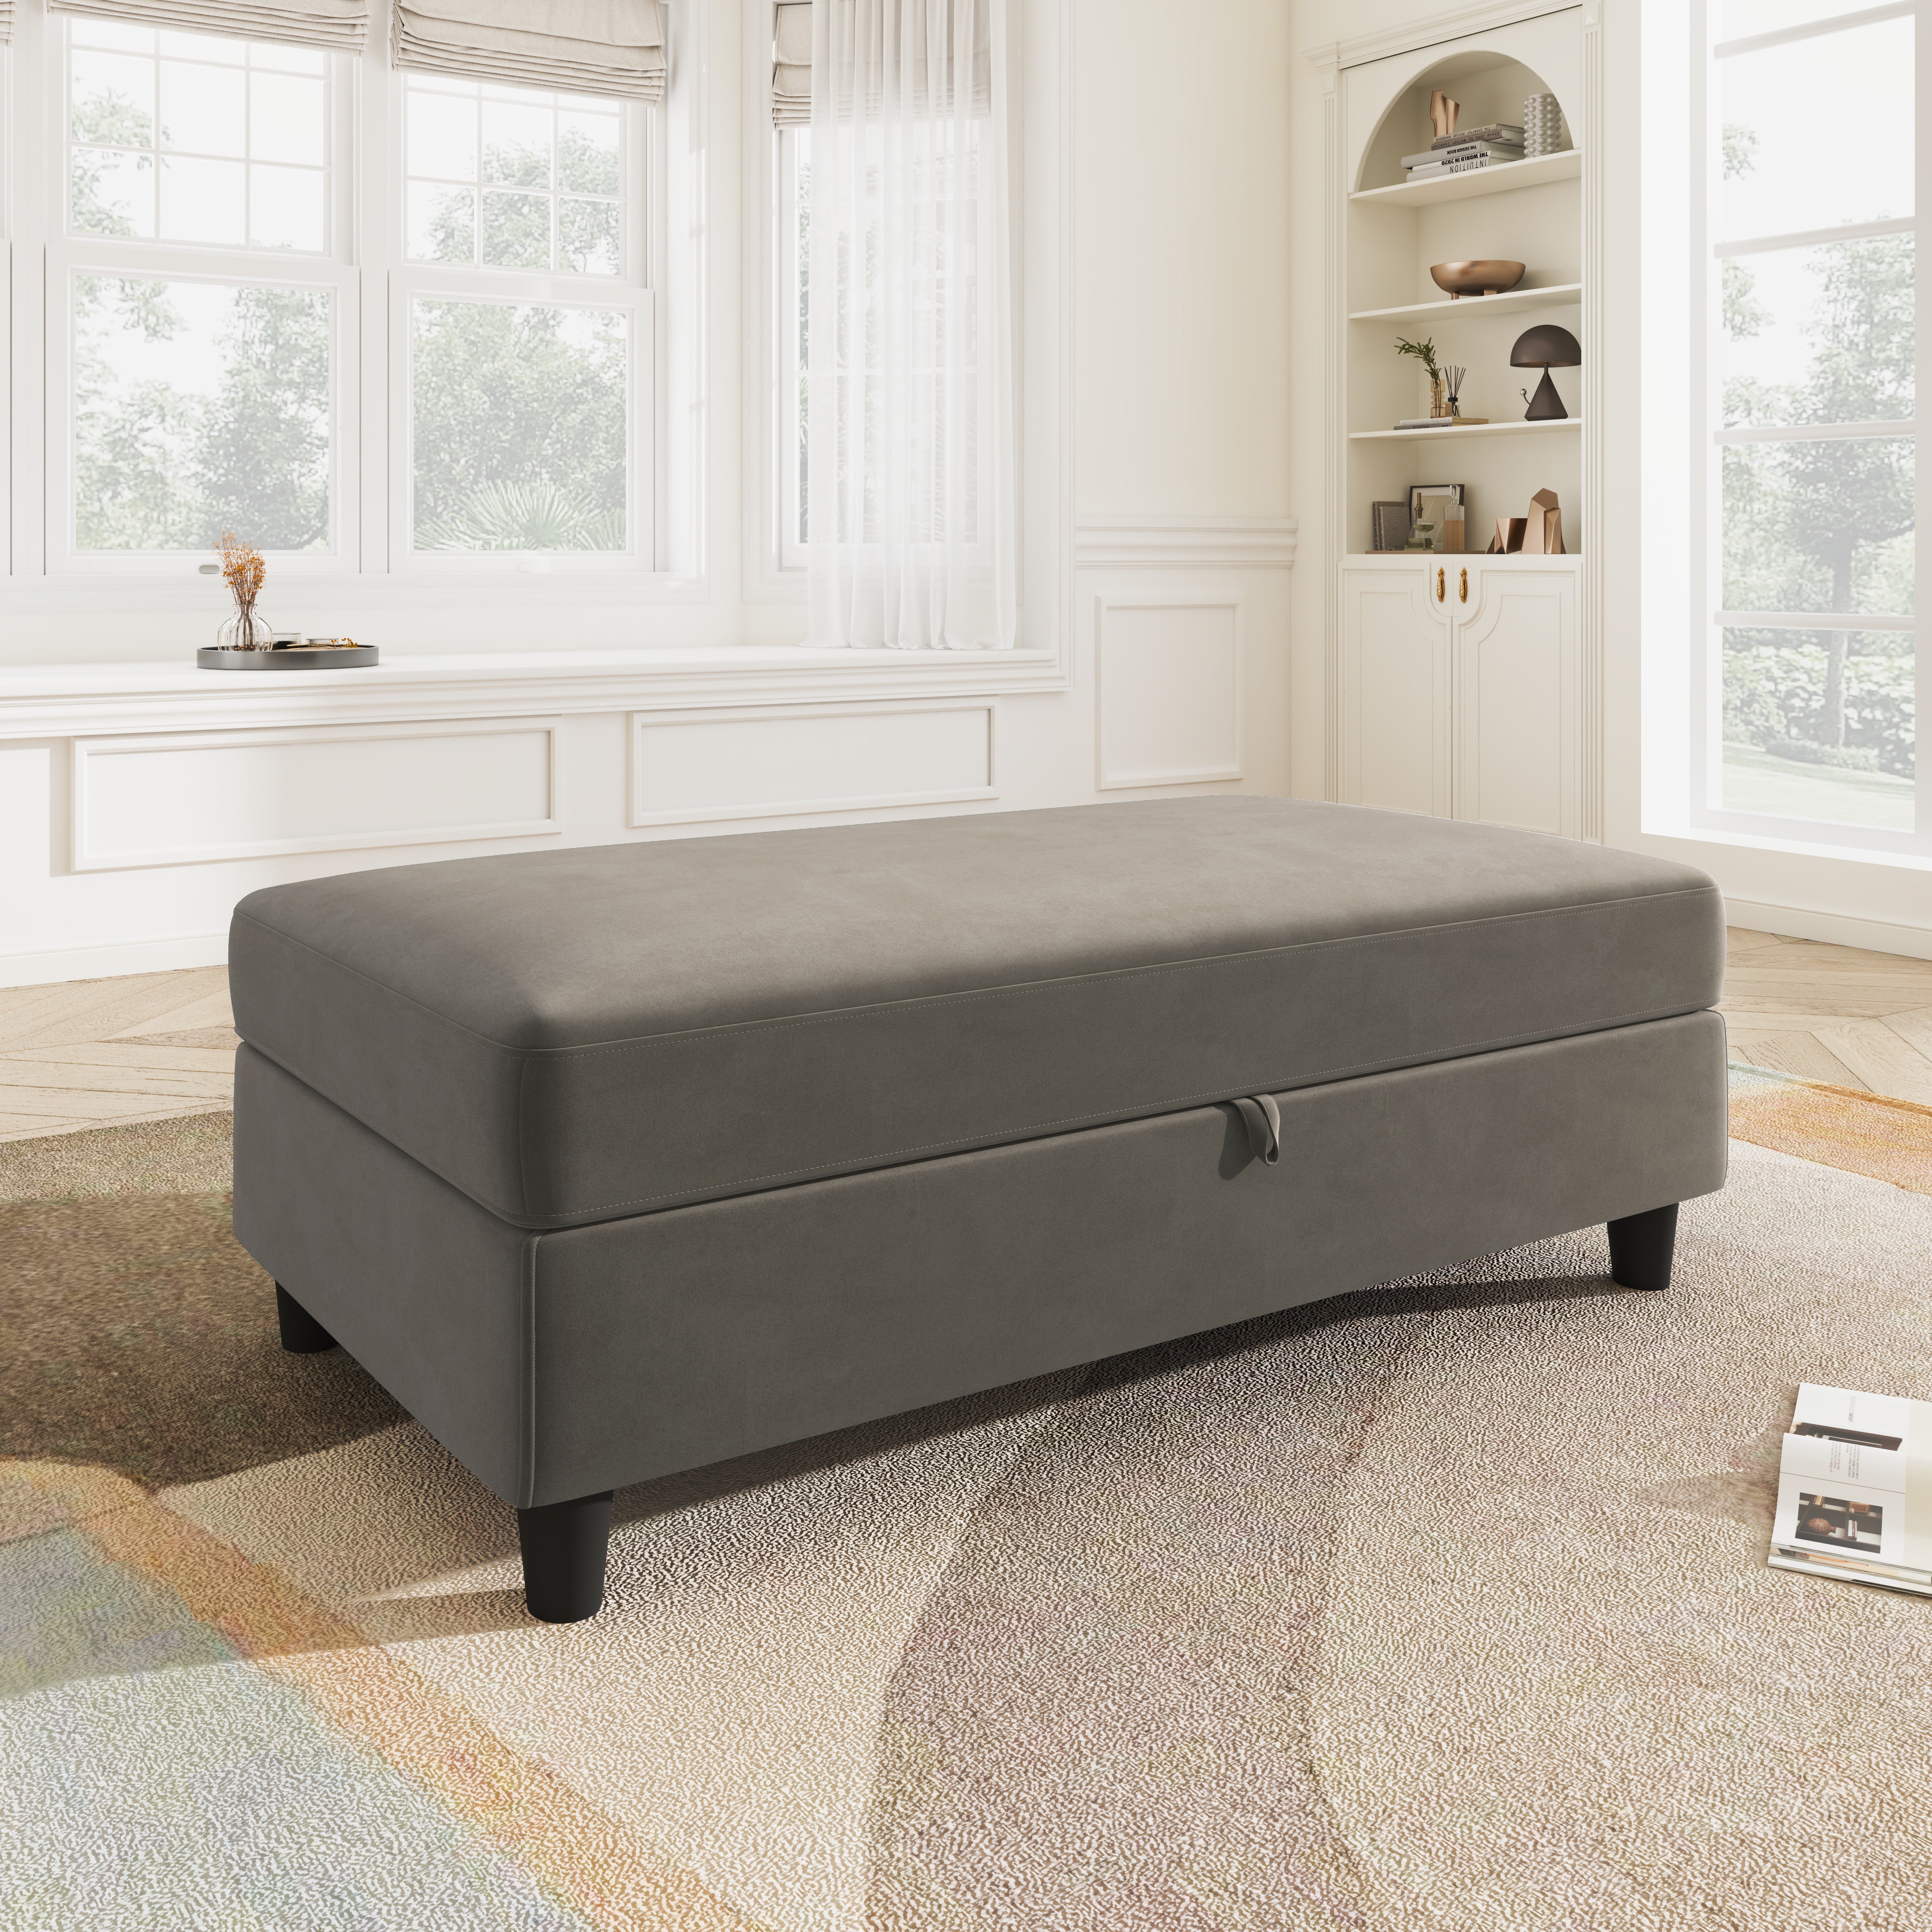 HONBAY Storage Ottoman for U-Shaped Sectional Sofa Couch